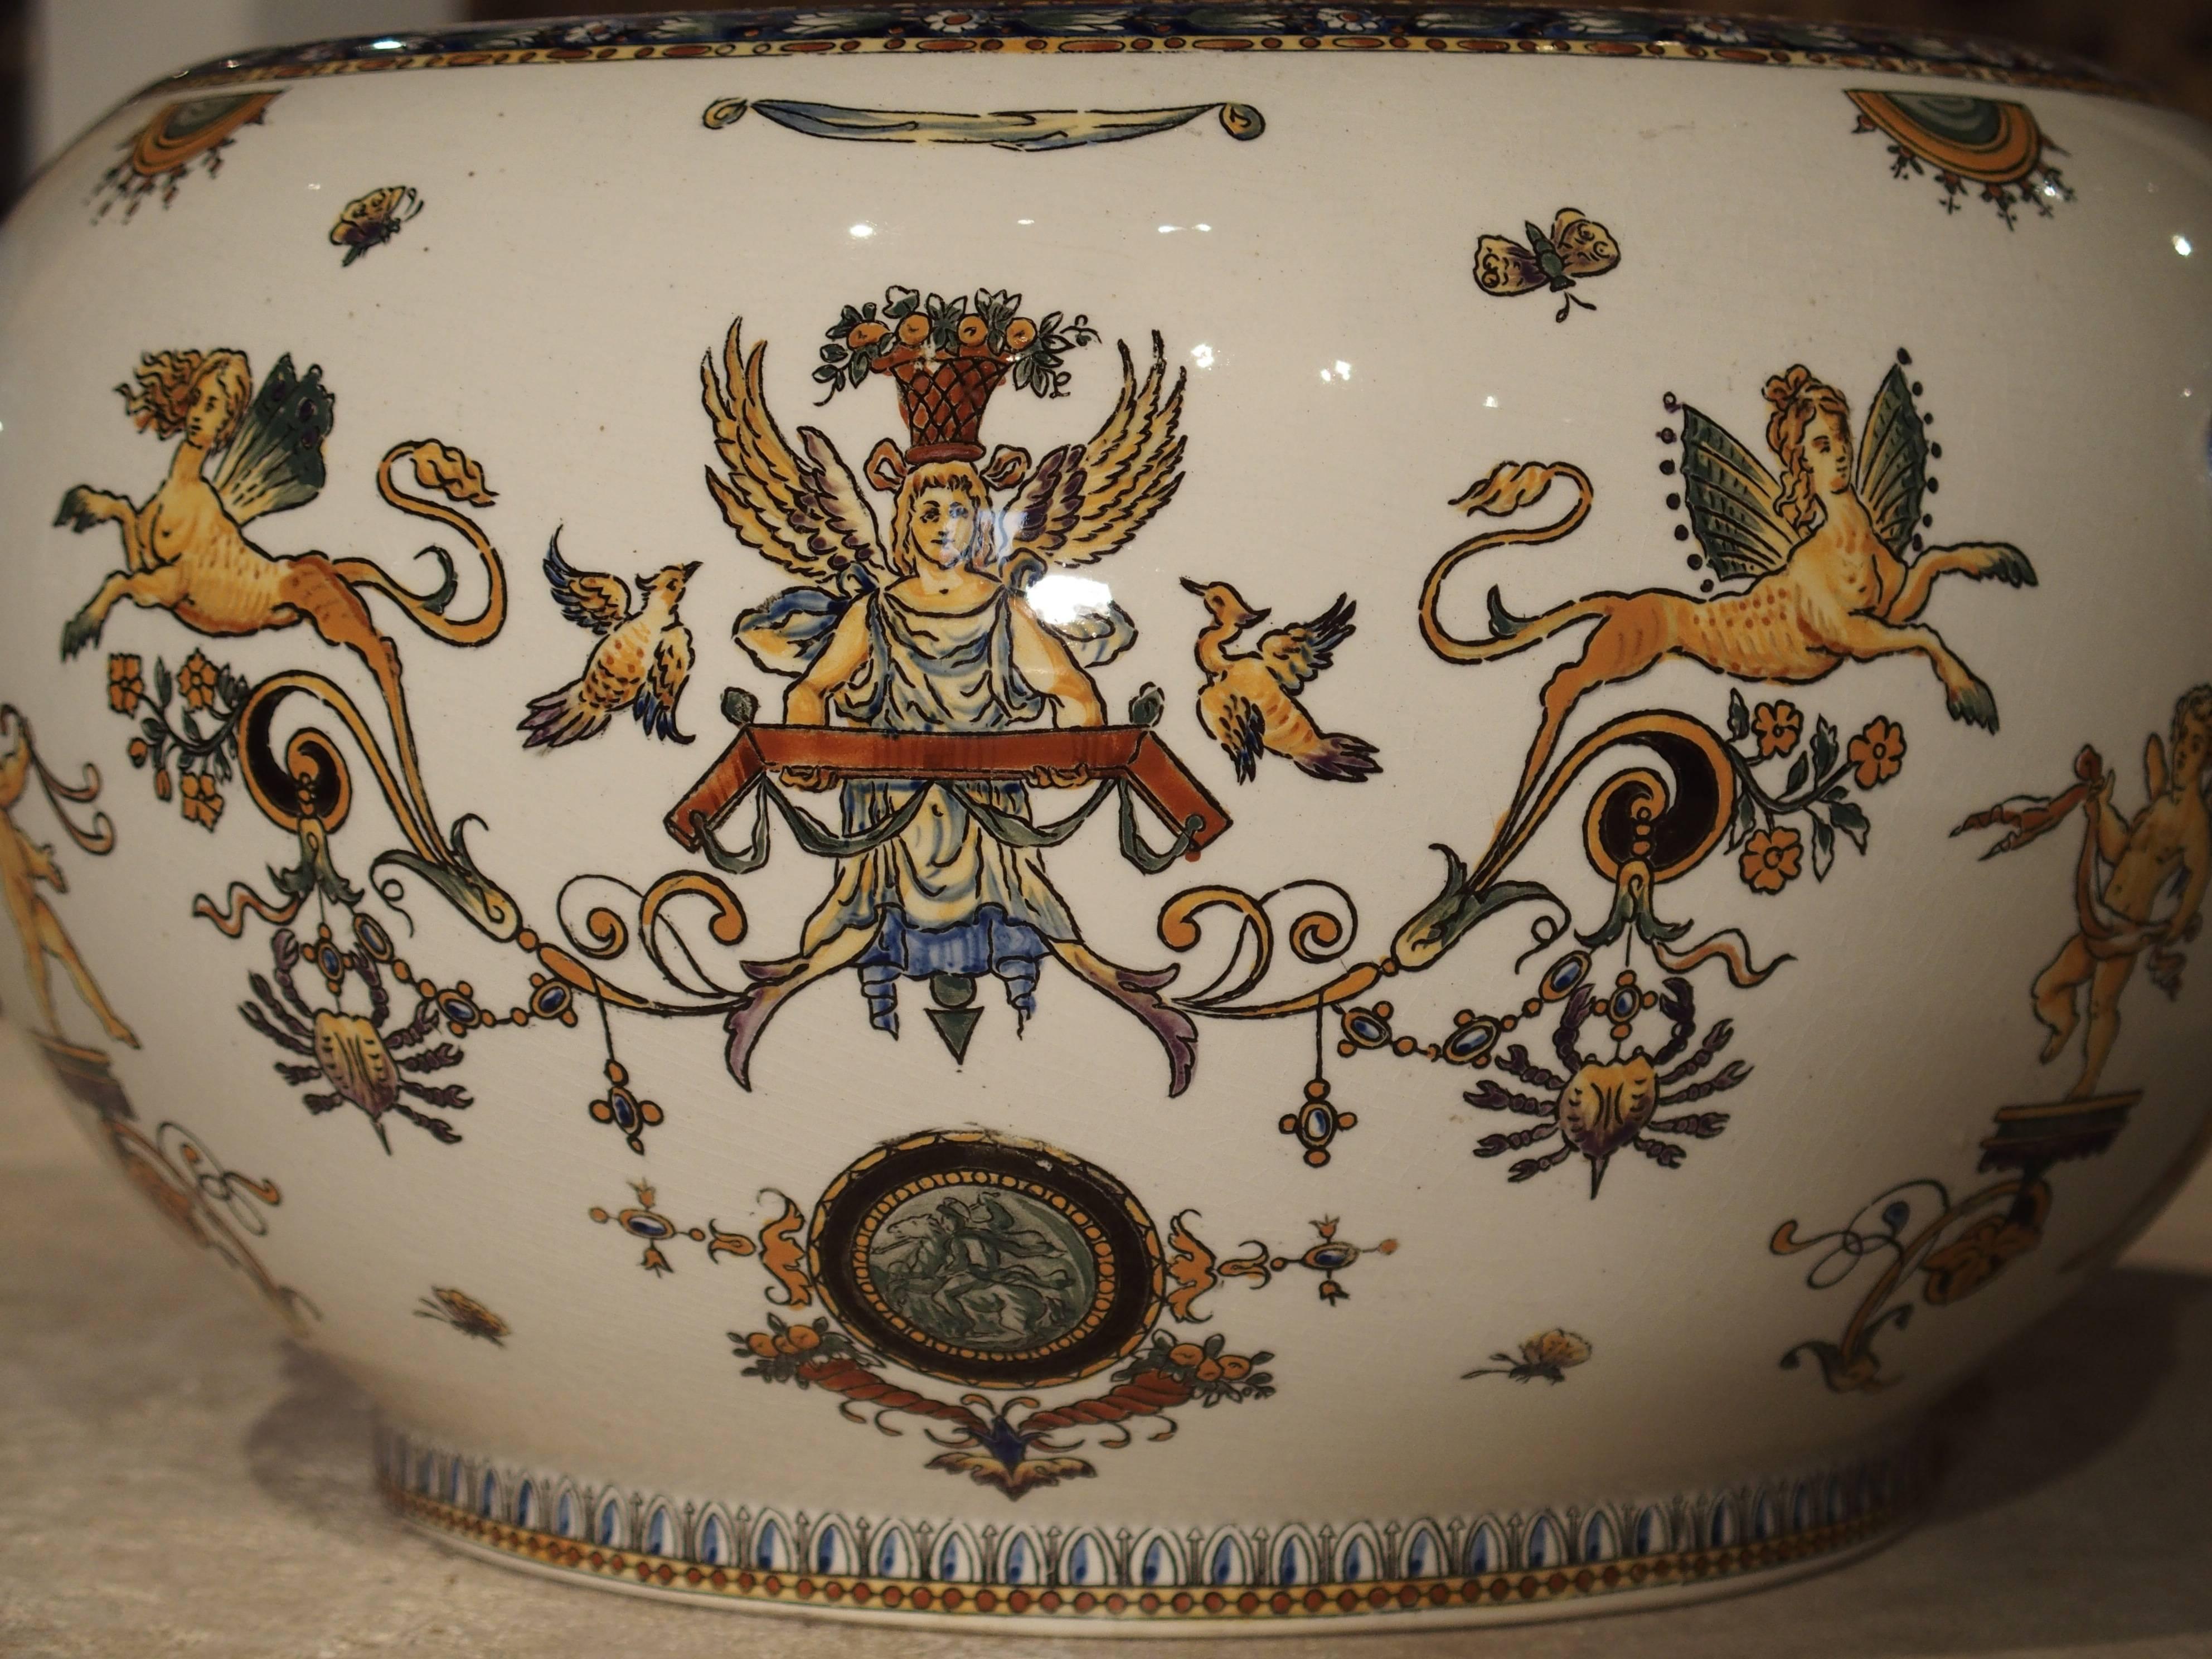 Faience Antique Gien Cachepot with Dolphin Handles from France, circa 1900